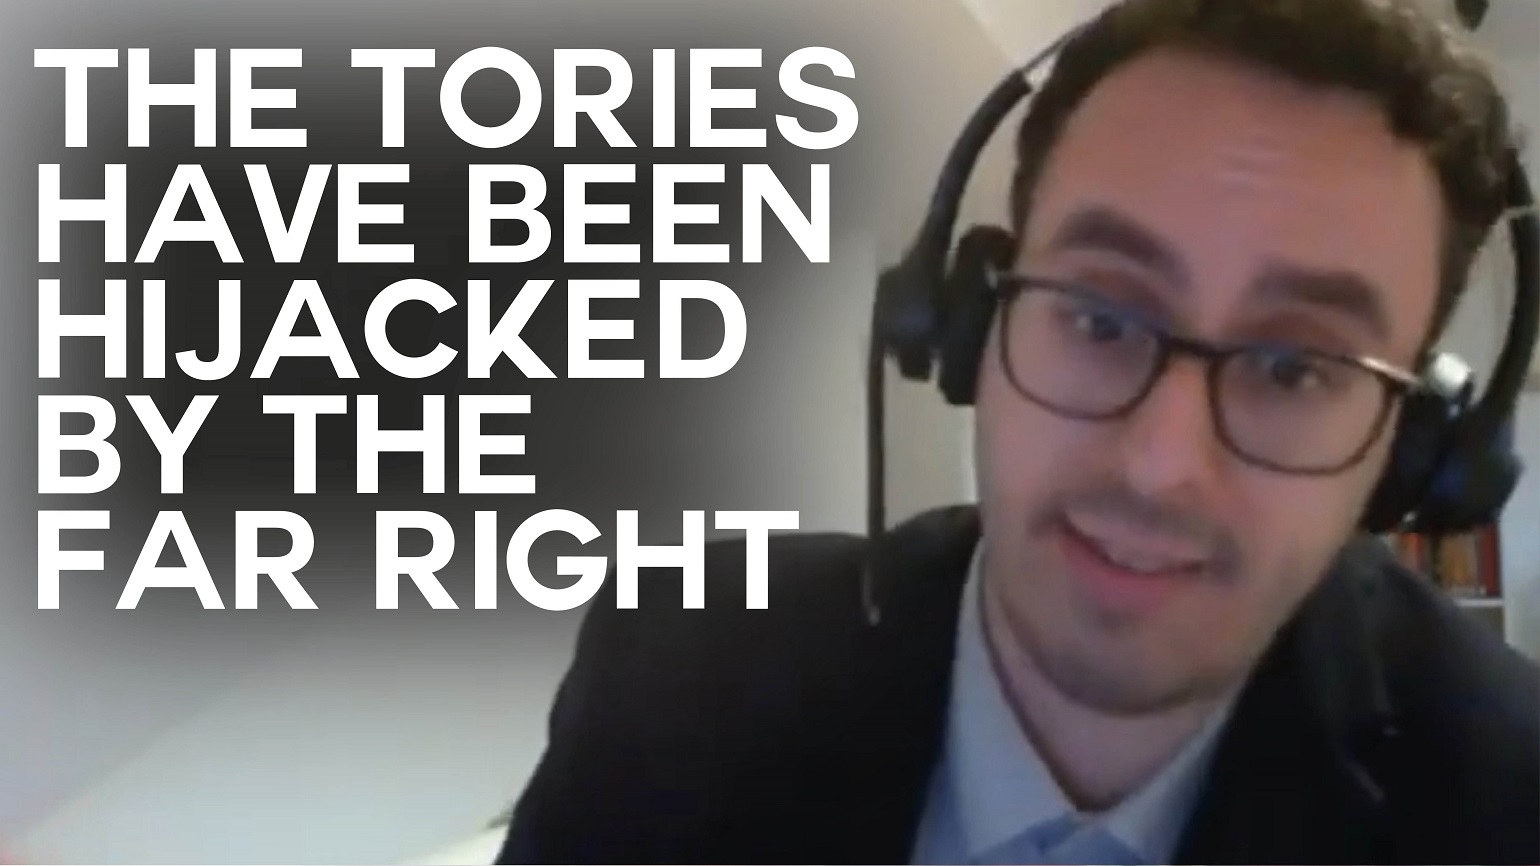 A still from an interview with Green Party migration spokesperson Benali Hamdache with text reading "The Tories have been hijacked by the far right"